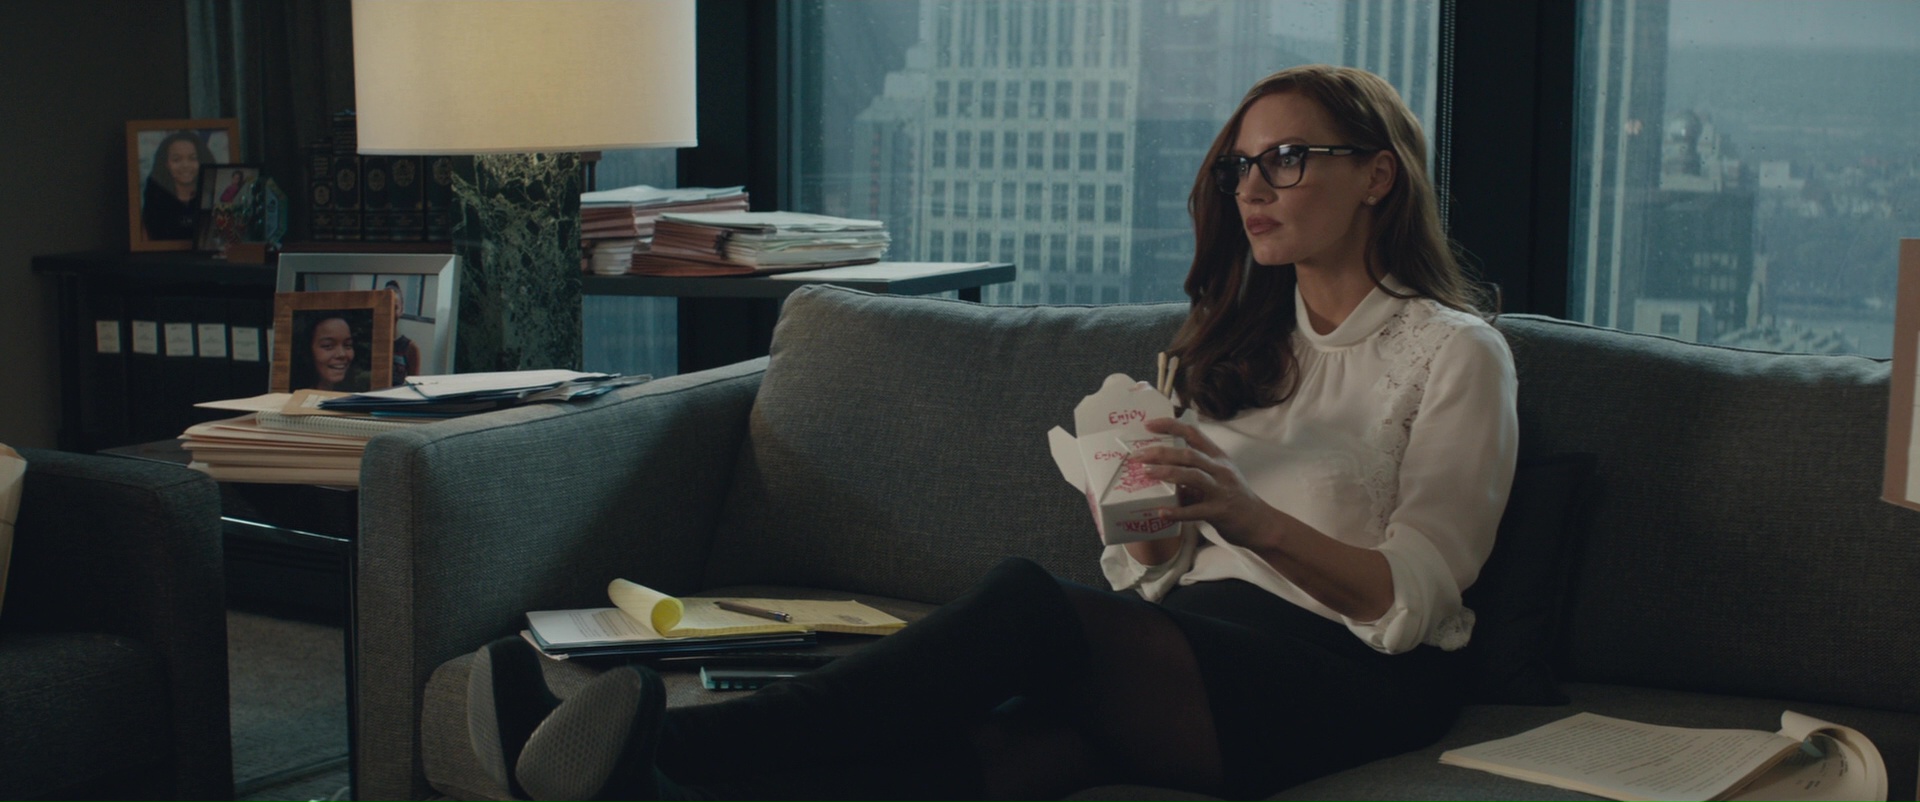 Prada Square Plastic Eyeglasses Worn by Jessica Chastain in Molly’s Game (2017) Movie1920 x 802